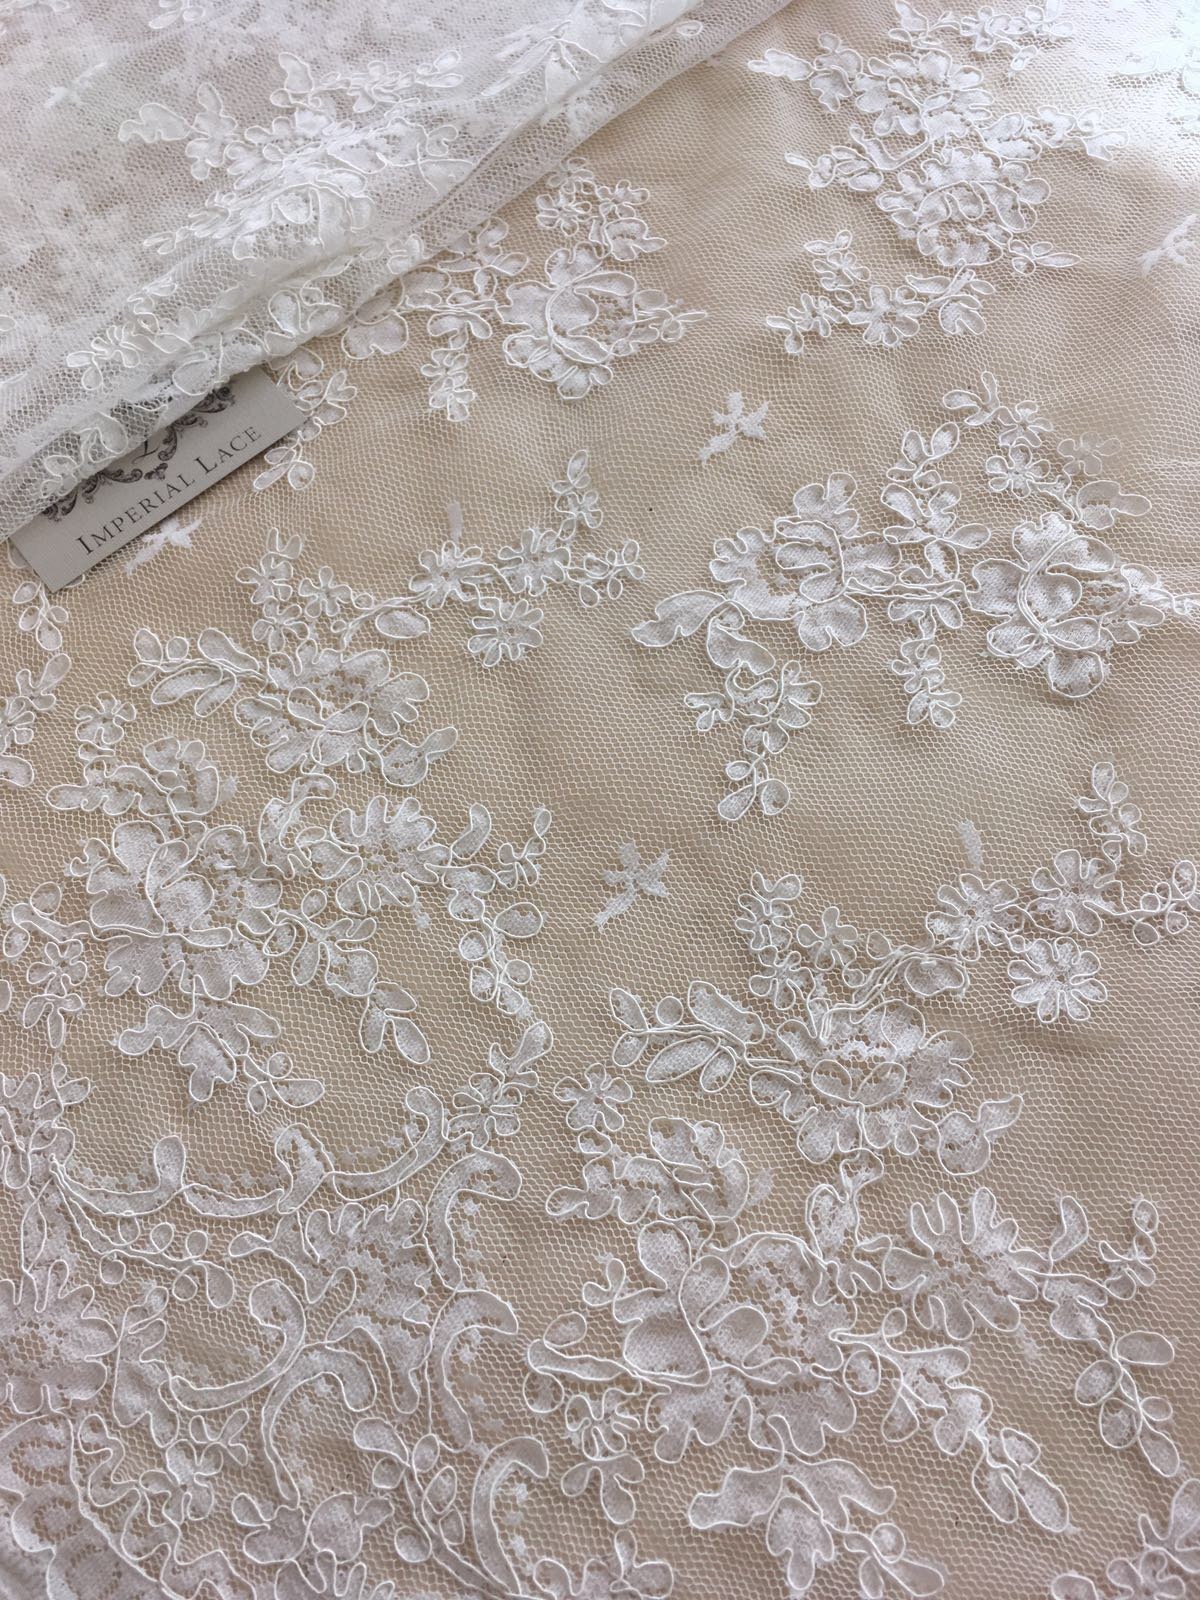 White lace fabric French Lace floral lace off white | Etsy